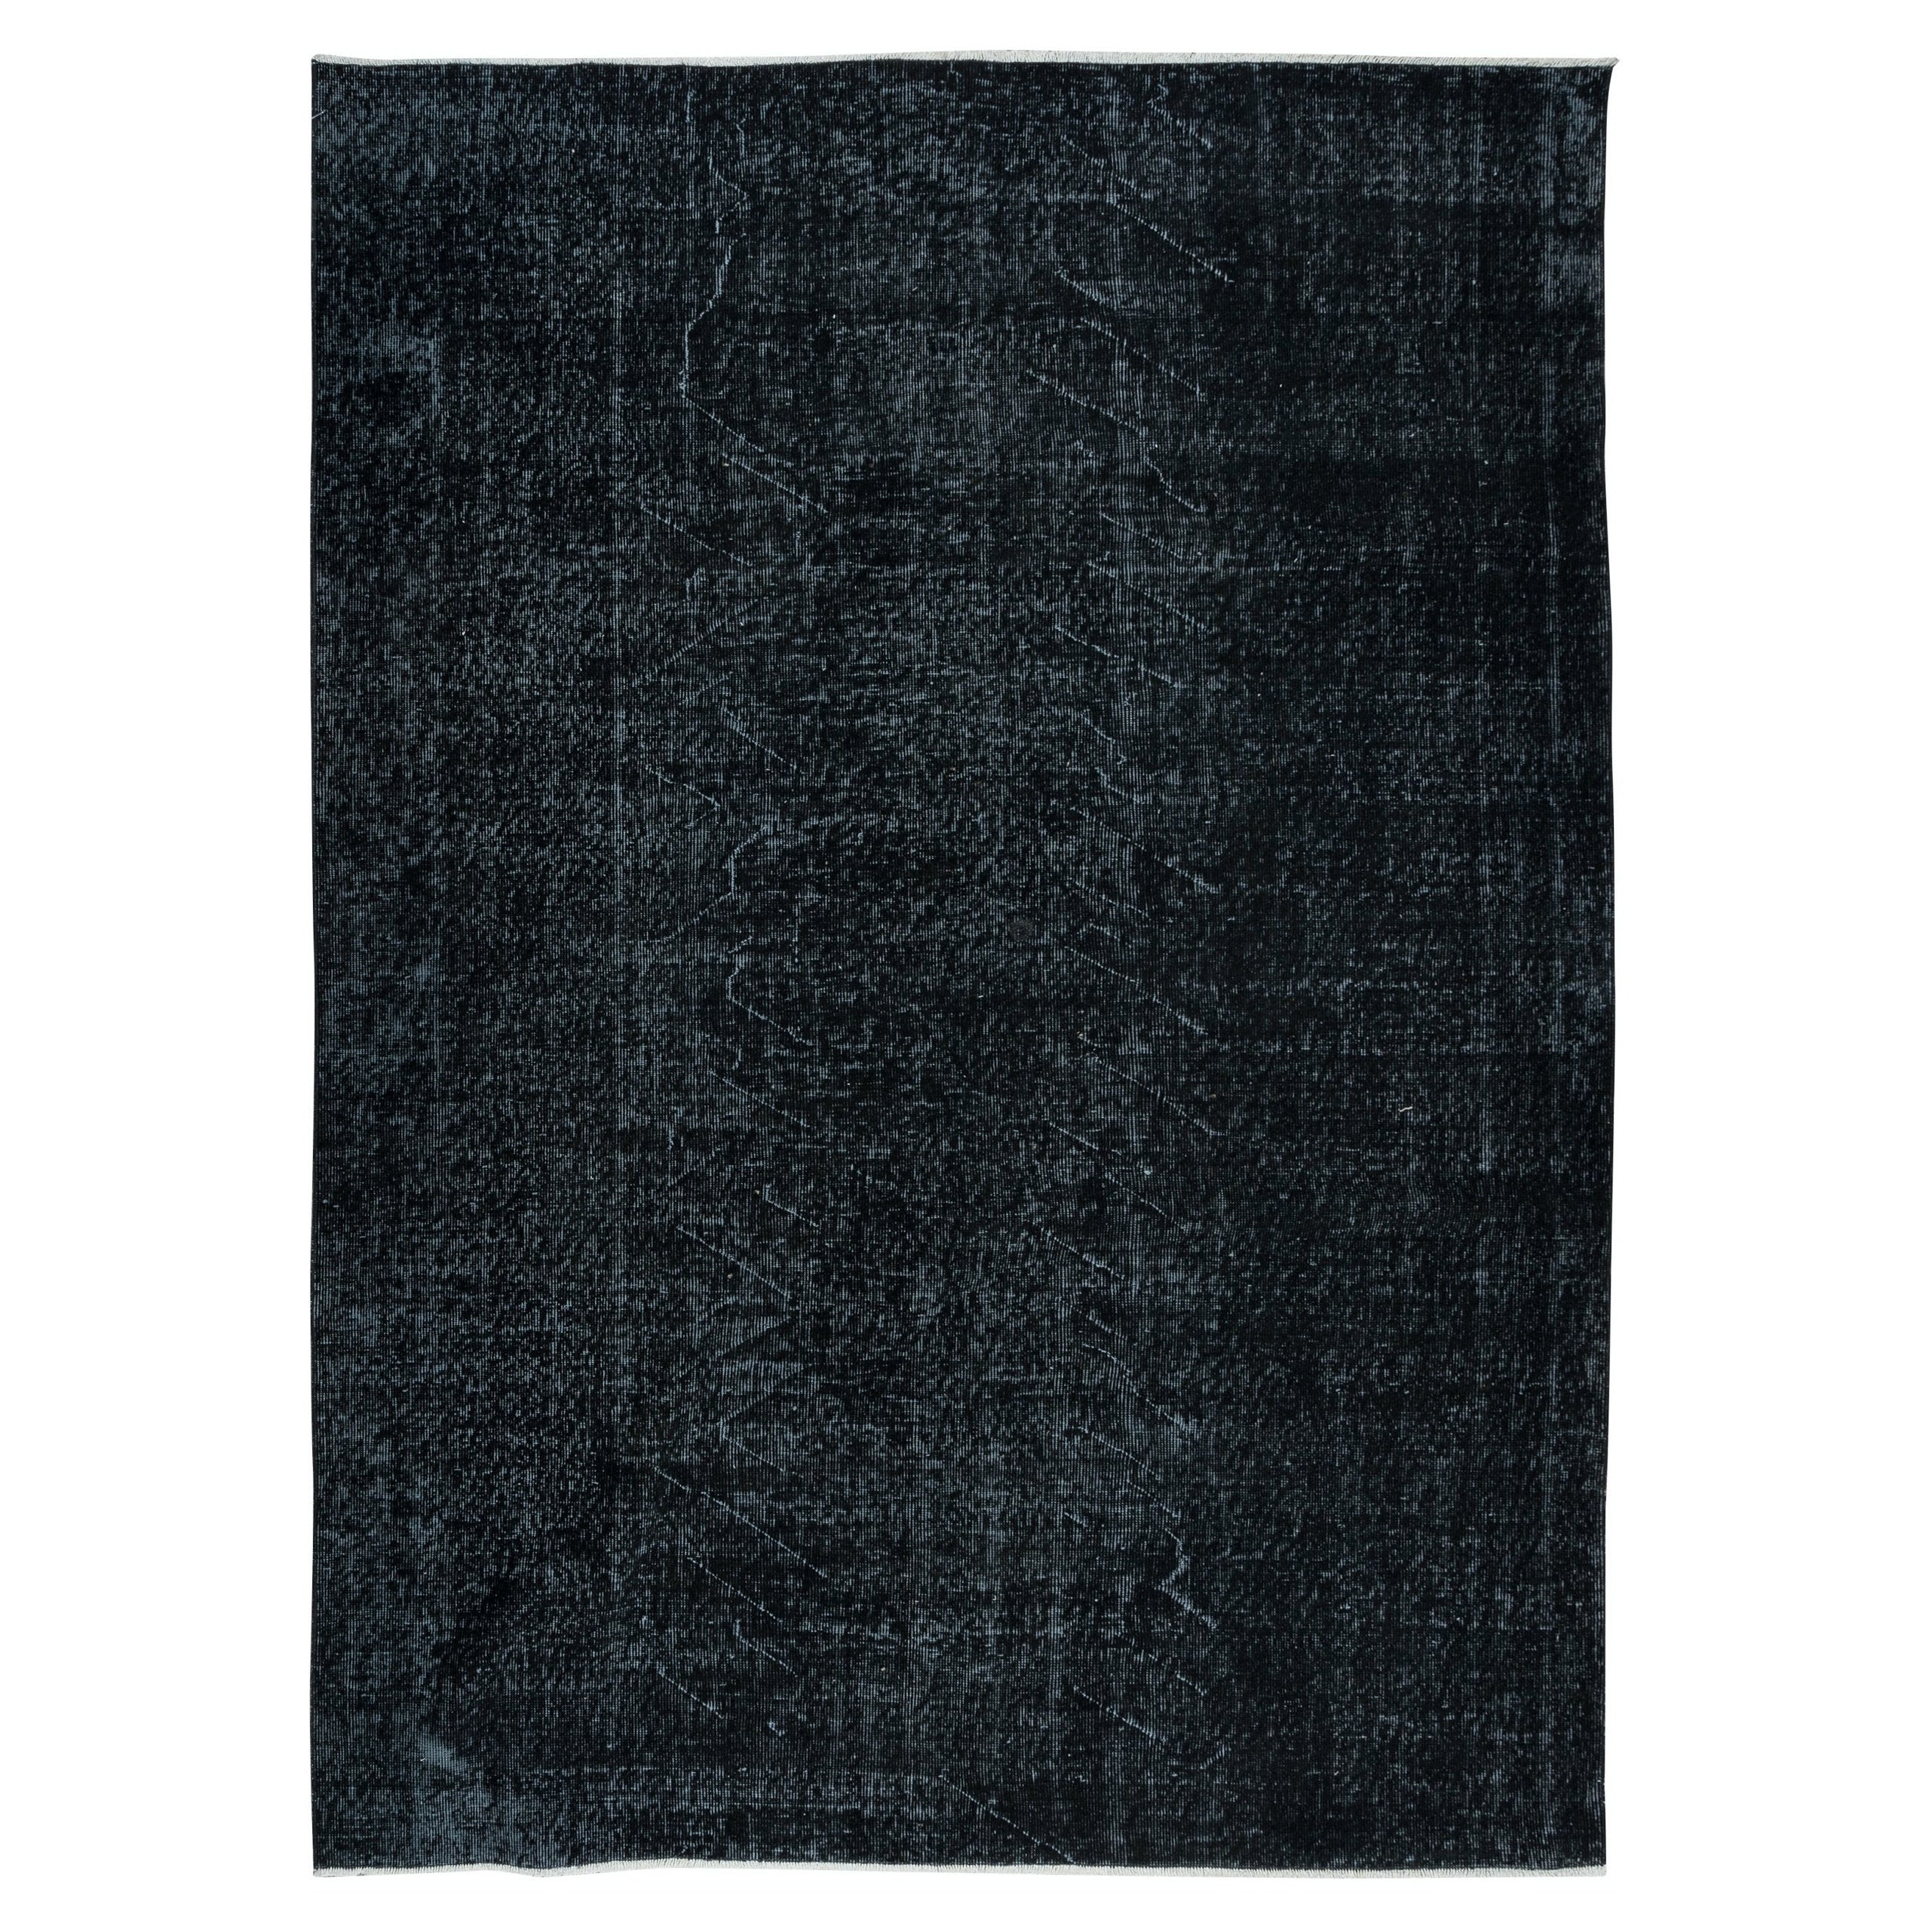 6.4x9 Ft Plain Black Area Rug, Handknotted and Handwoven in Isparta, Turkey